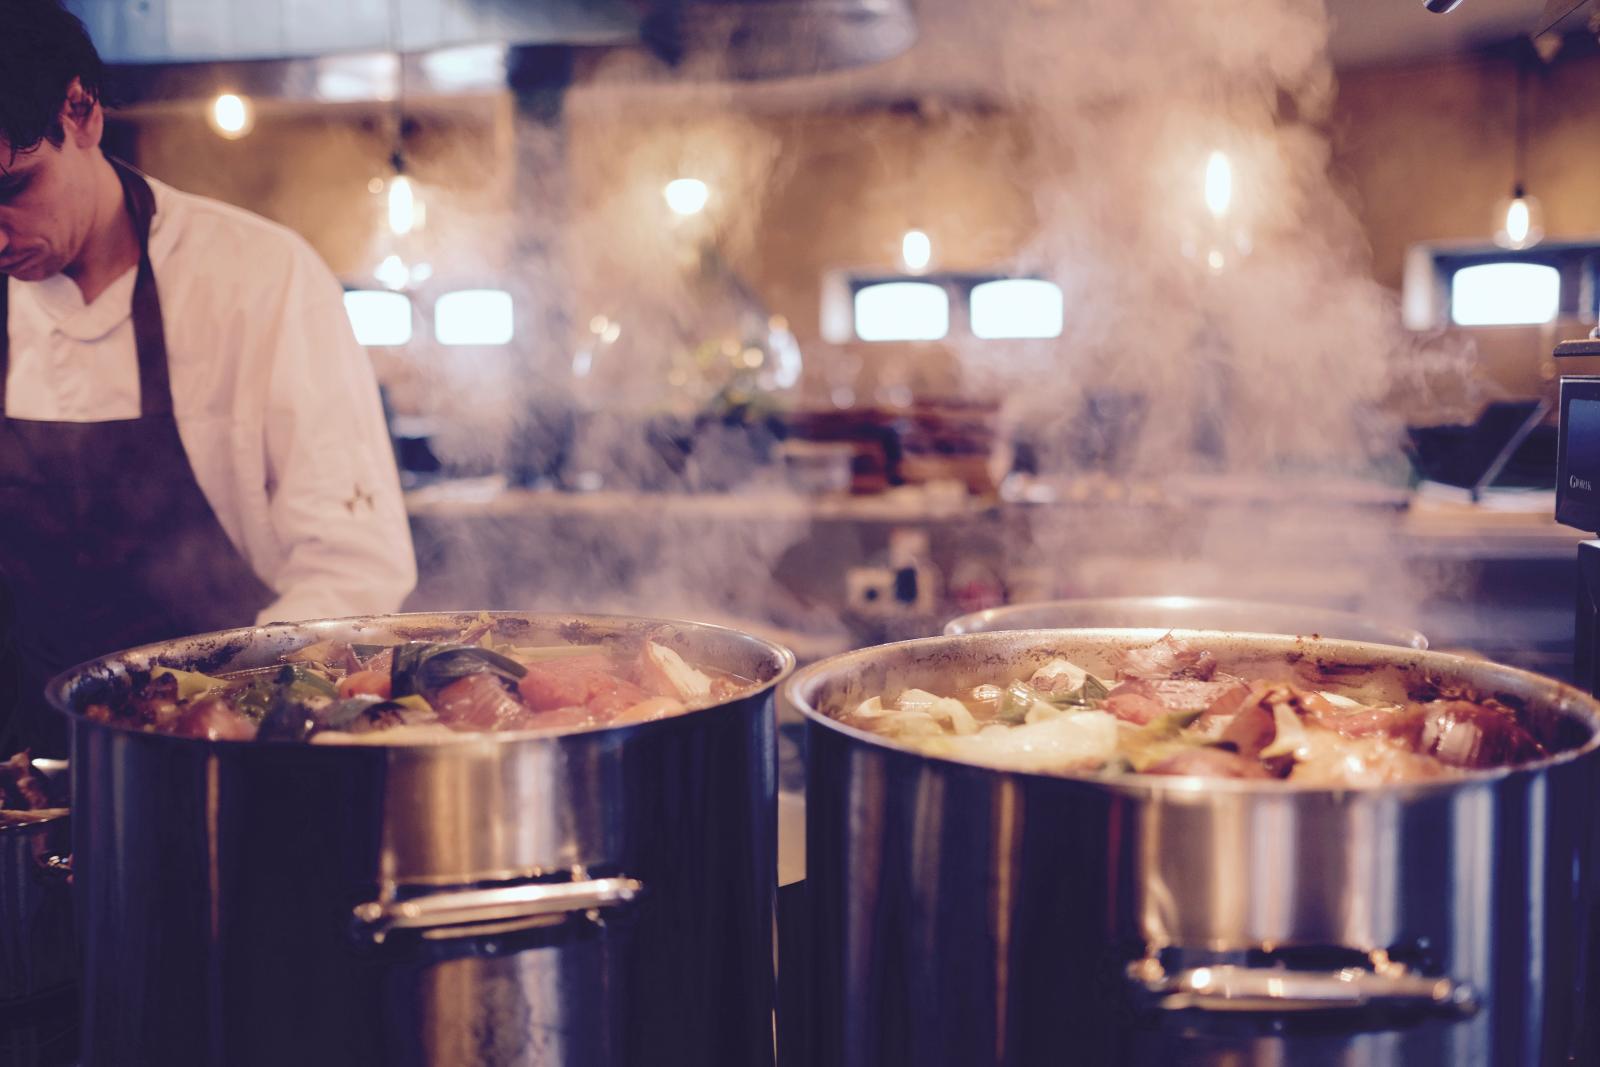 Chef cooking dinner. Photo credit: Pexels